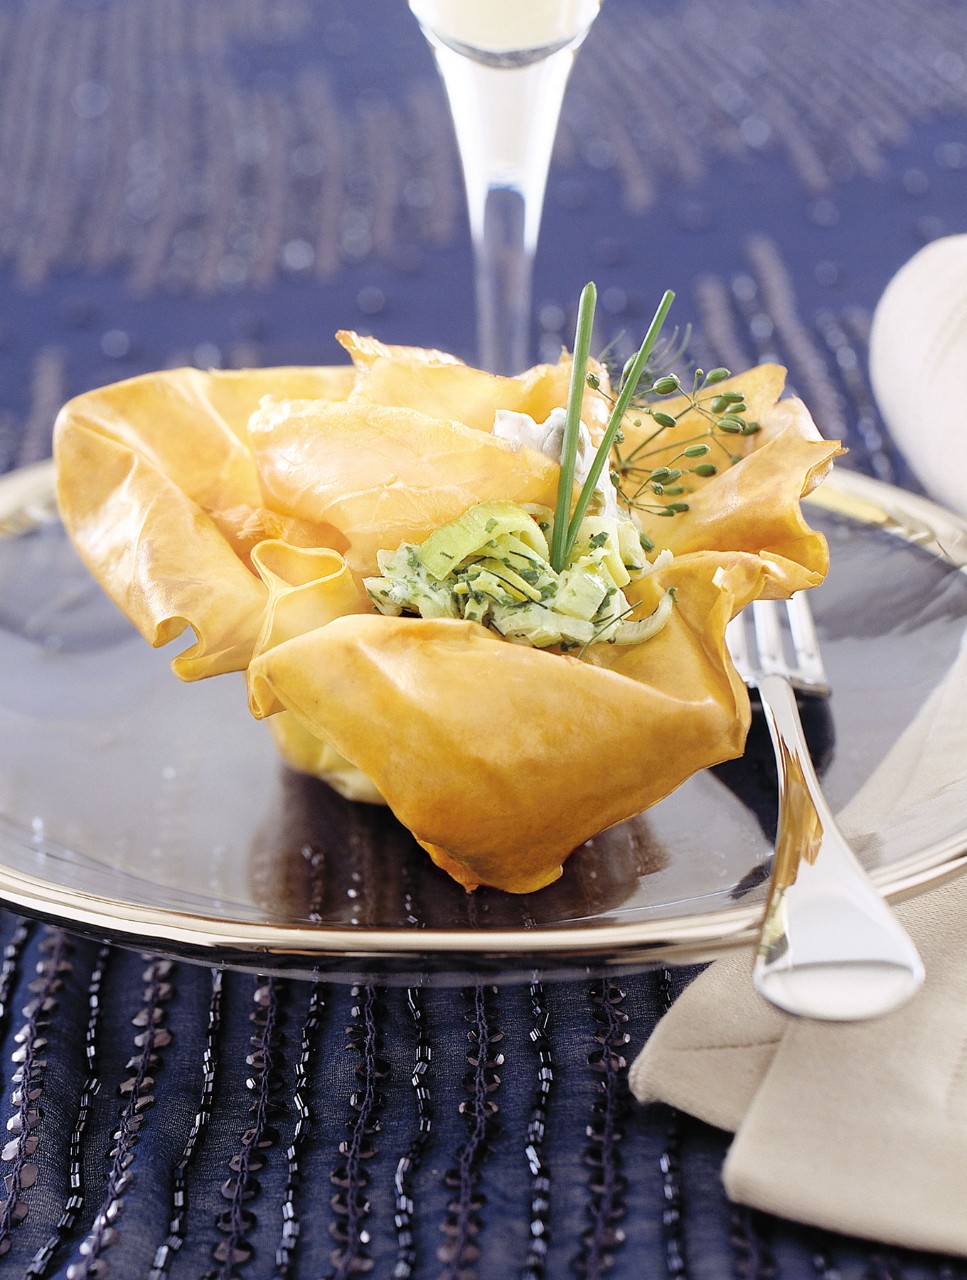 Phyllo Nests with Smoked Salmon, Leeks and Caper Sour Cream